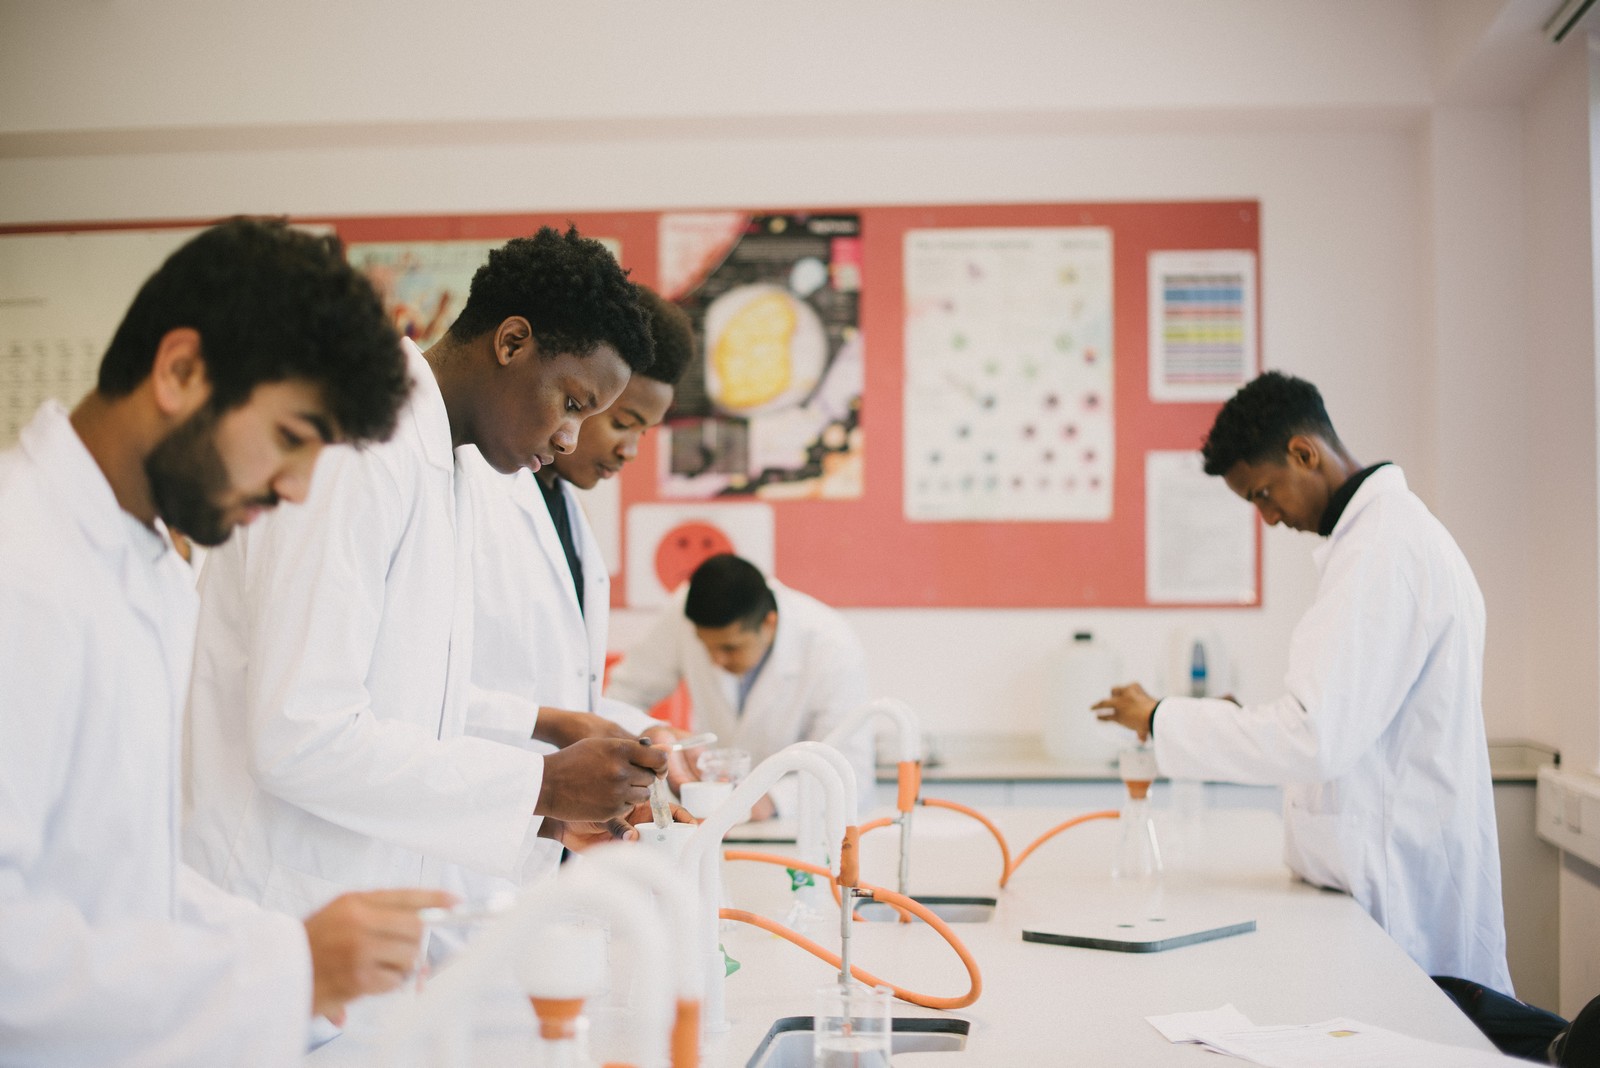 Applied Science - BTEC Level 3 Extended Certificate - 2 years (1 A Level)